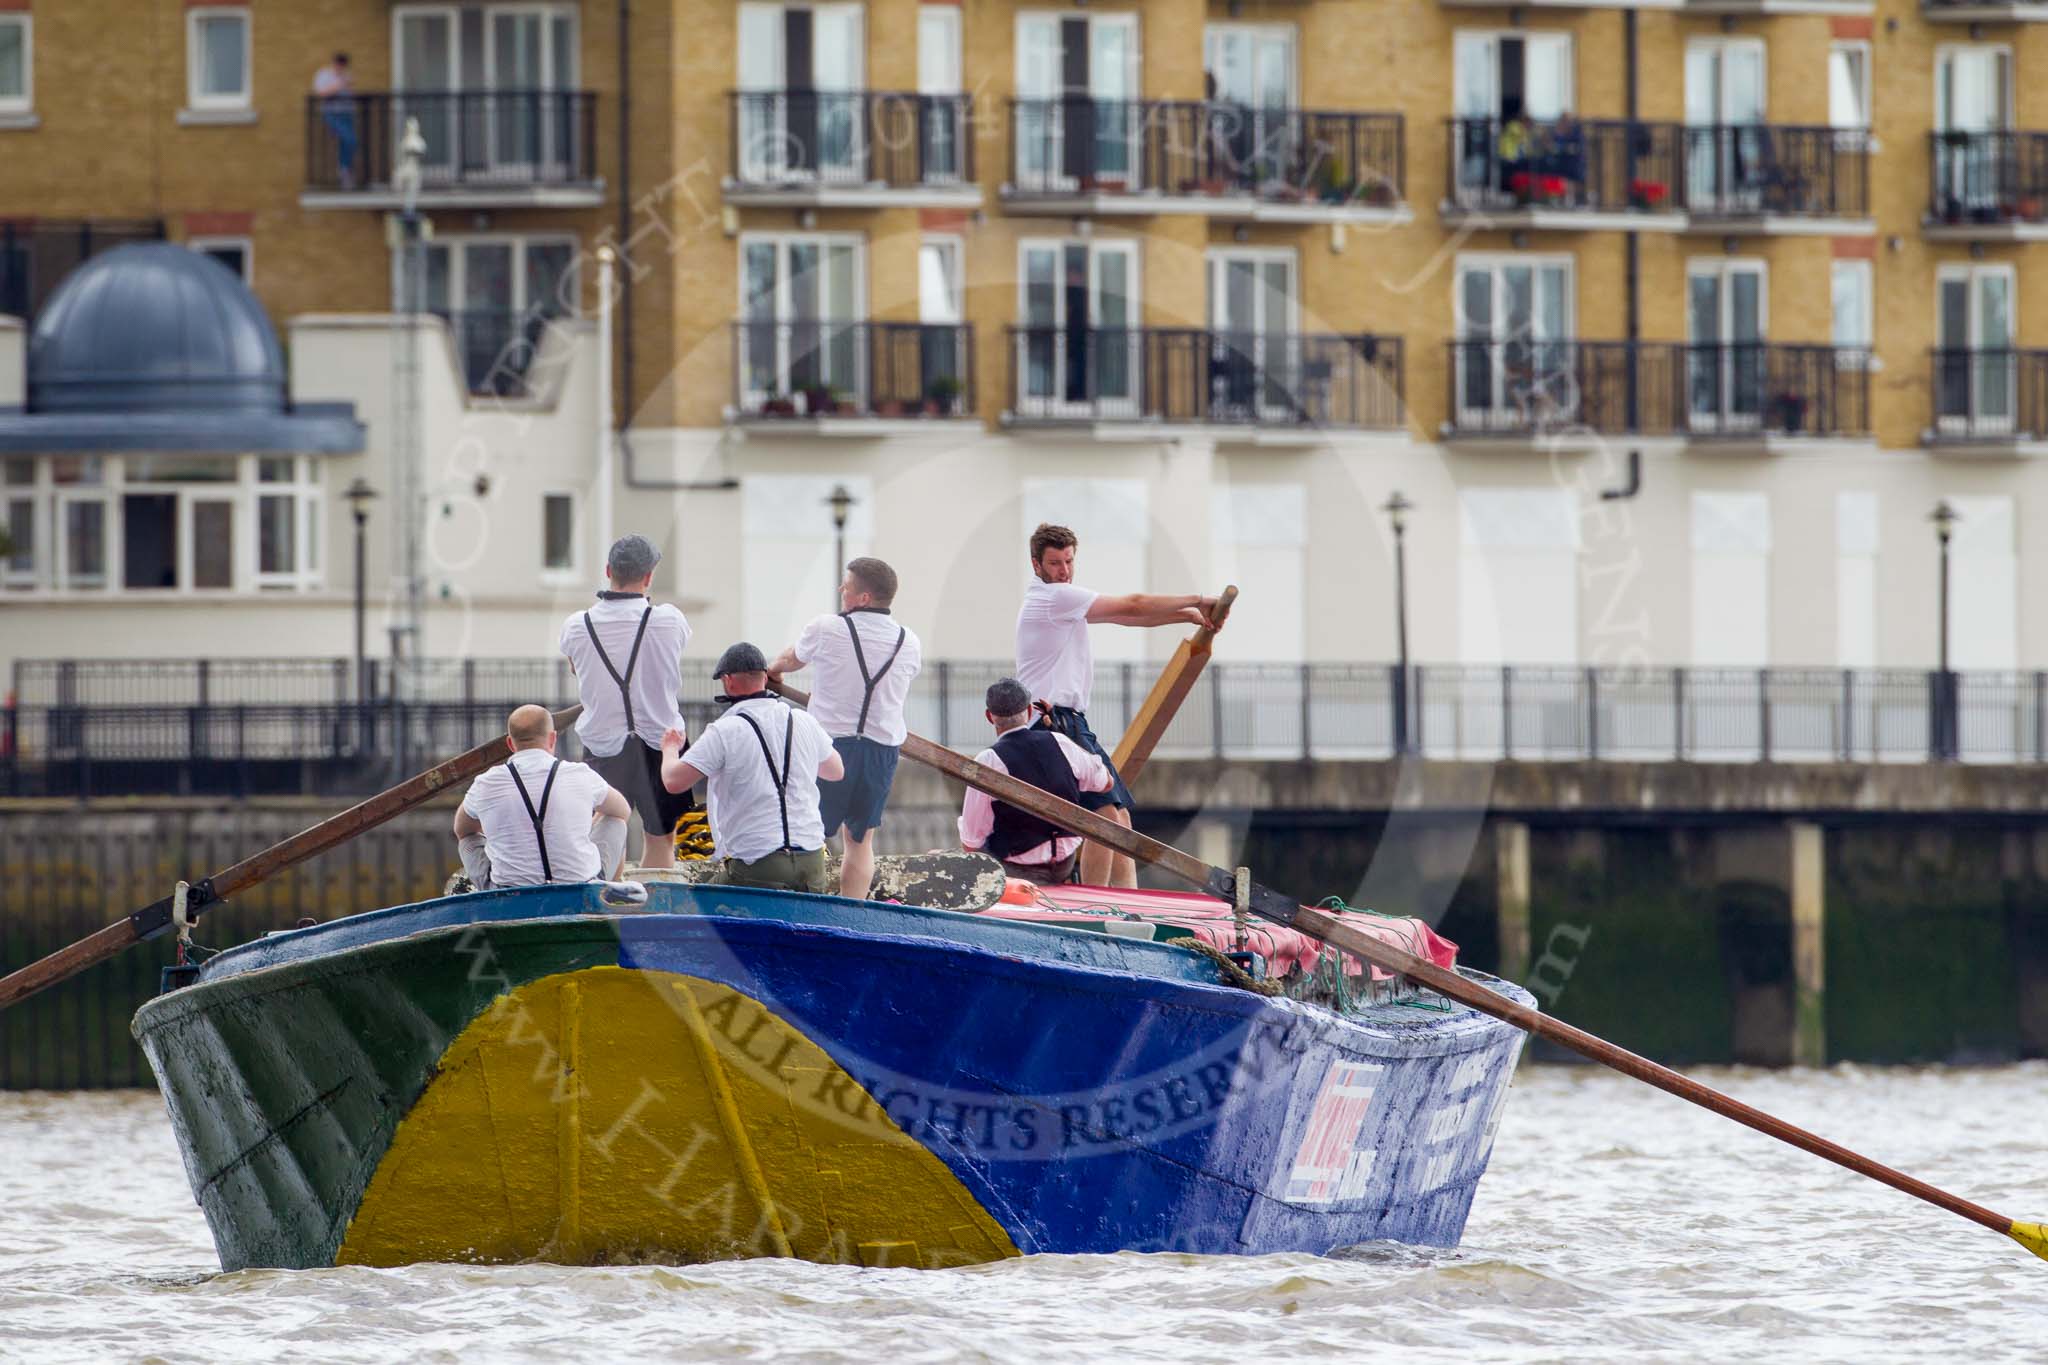 TOW River Thames Barge Driving Race 2014.
River Thames between Greenwich and Westminster,
London,

United Kingdom,
on 28 June 2014 at 13:05, image #194